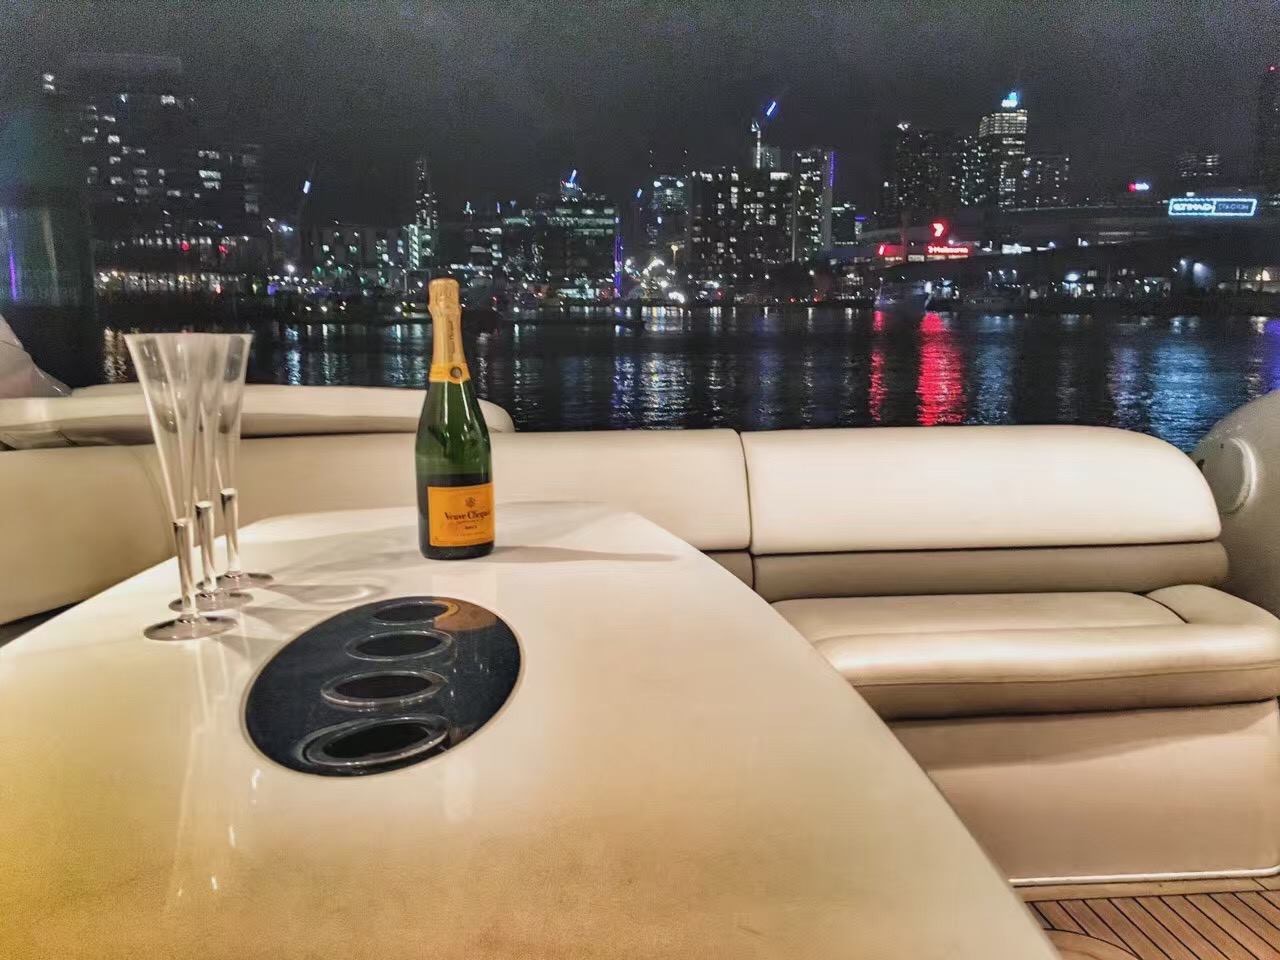 yacht hire melbourne for party